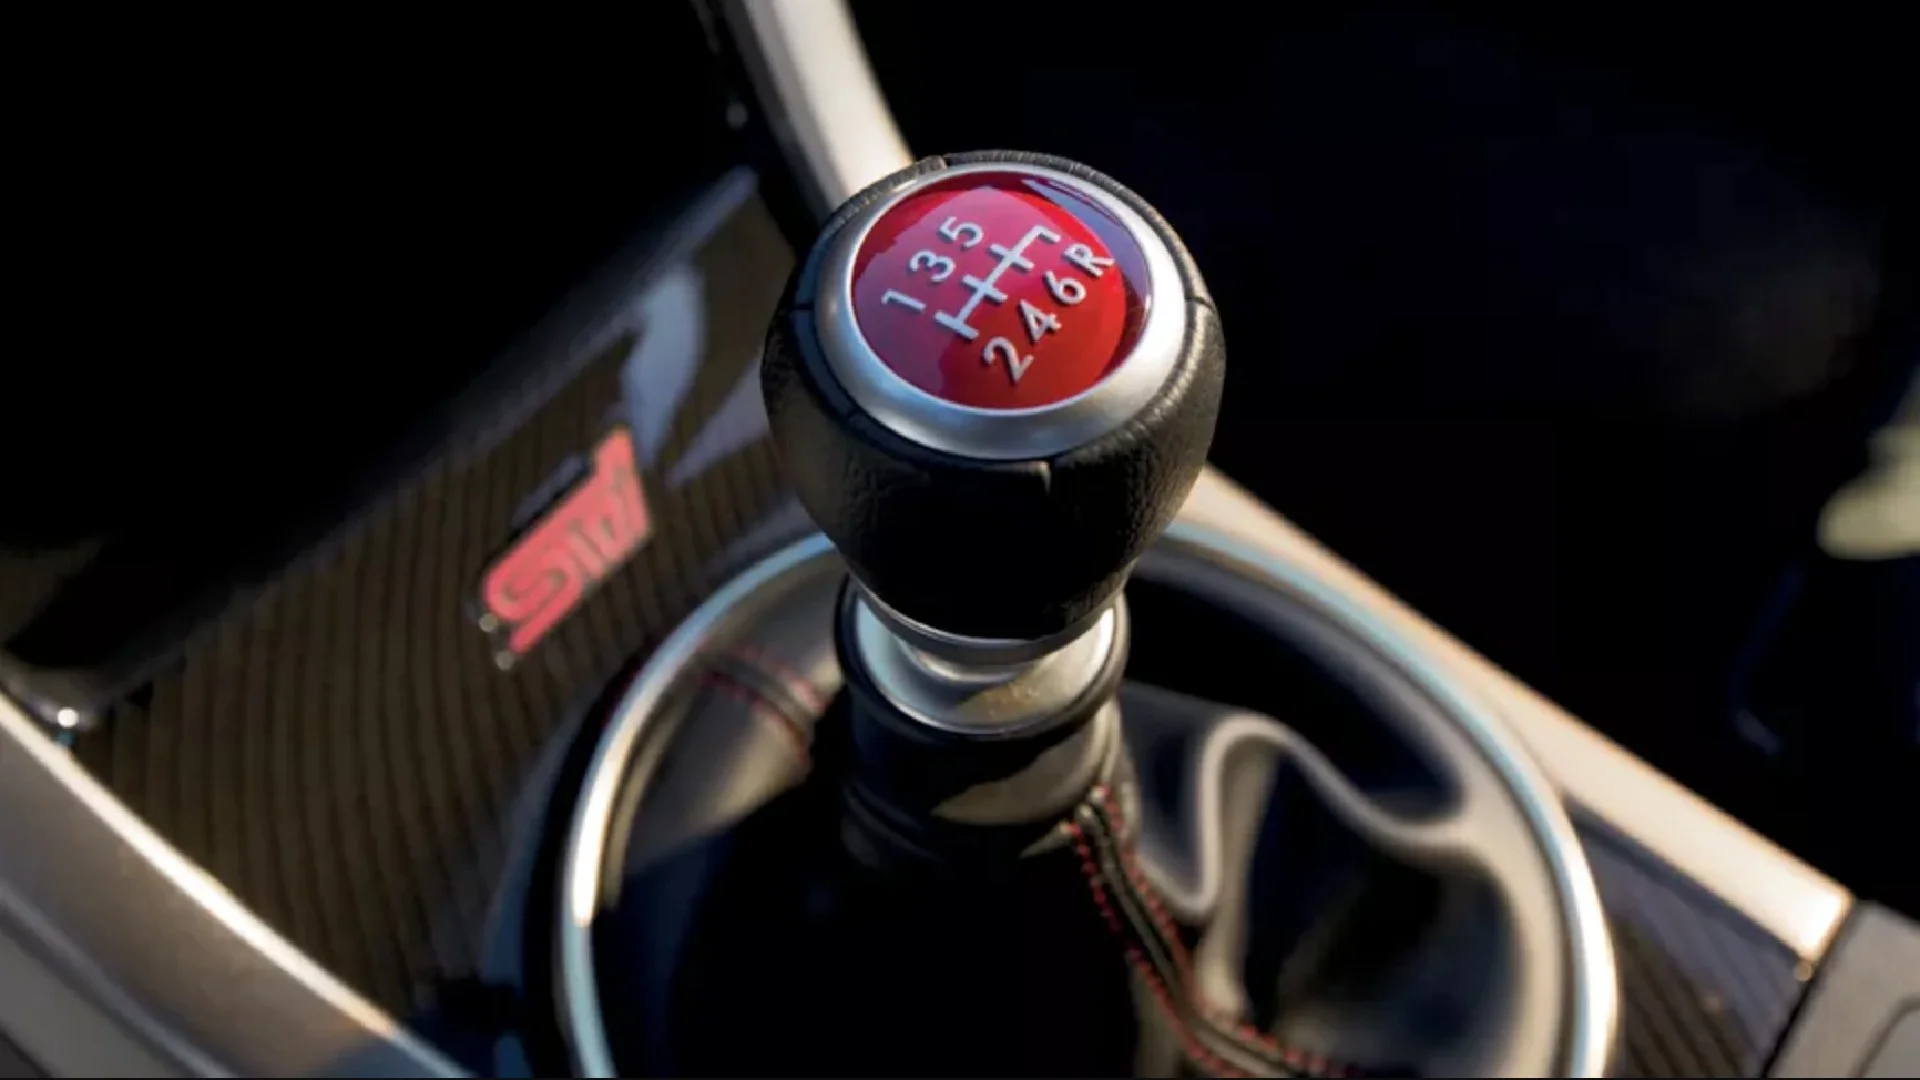 The Lifeline of Manual Transmissions and the Role of Fluids